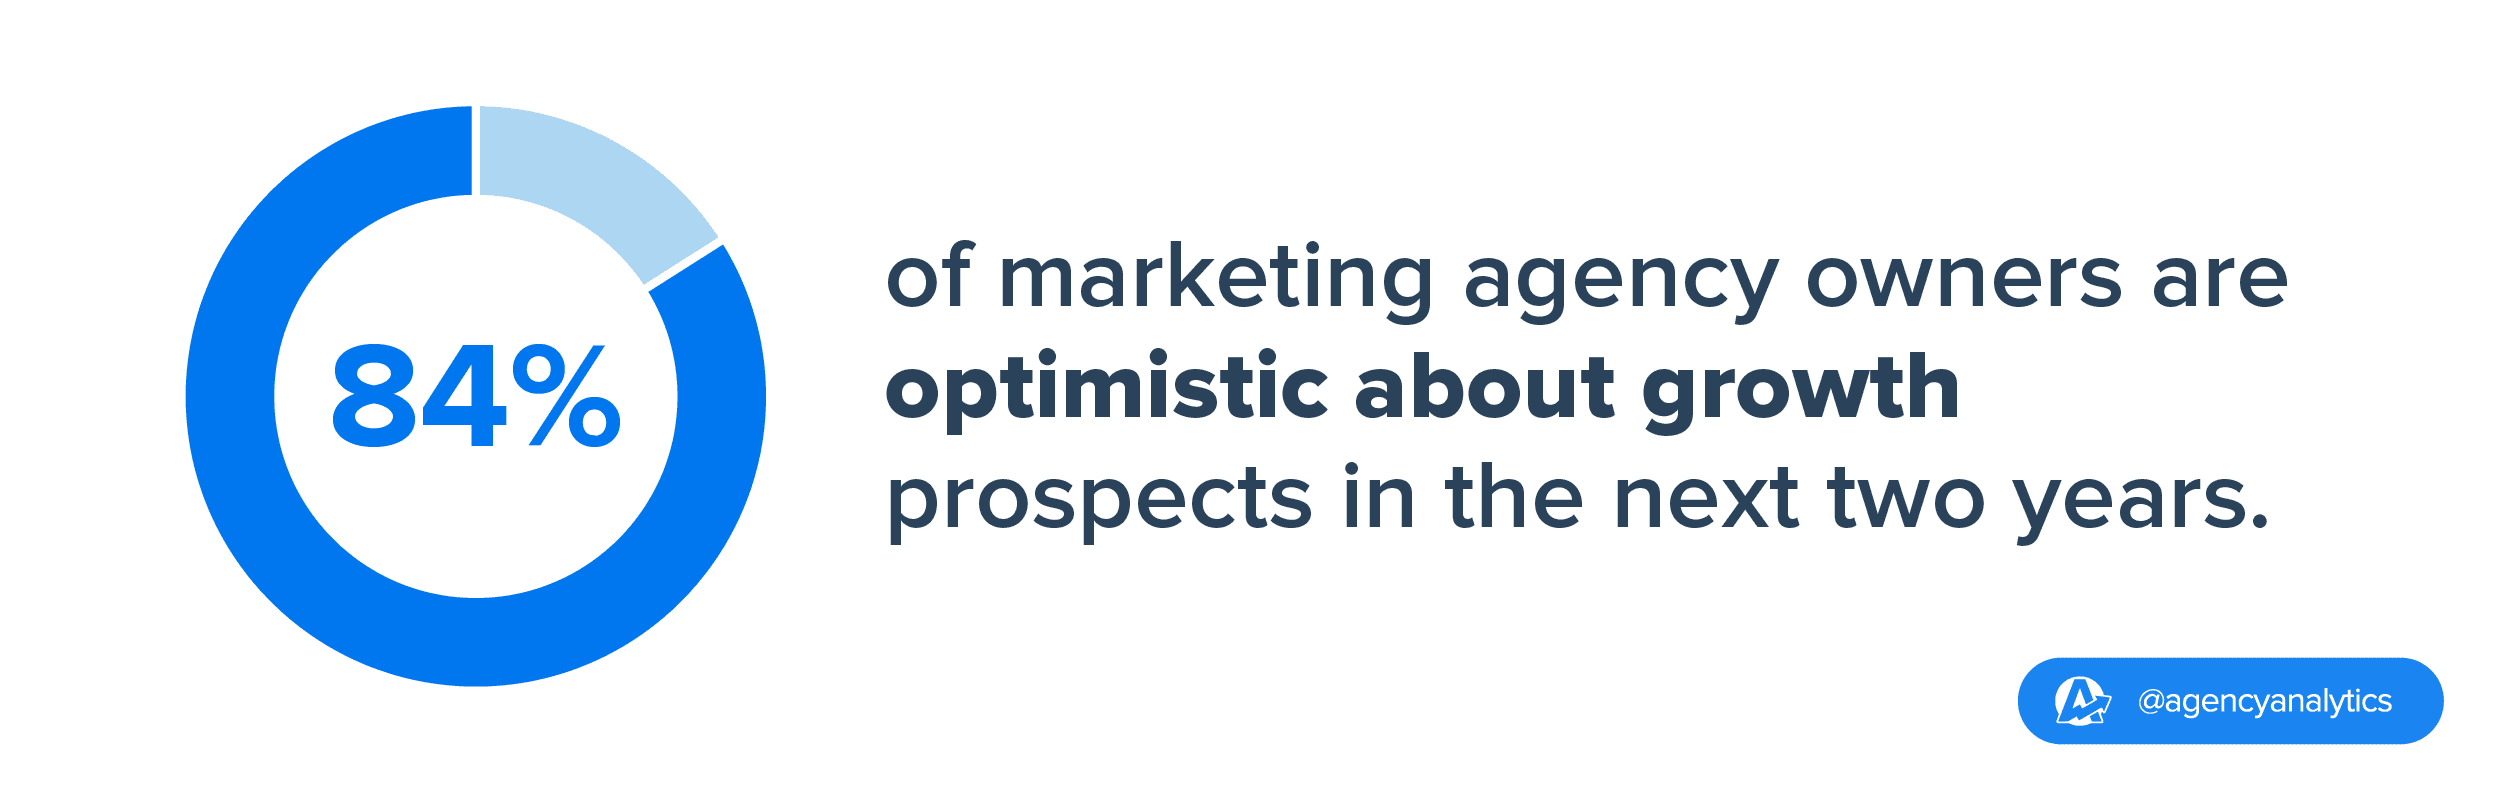 84% of marketing agency owners are optimistic about growth